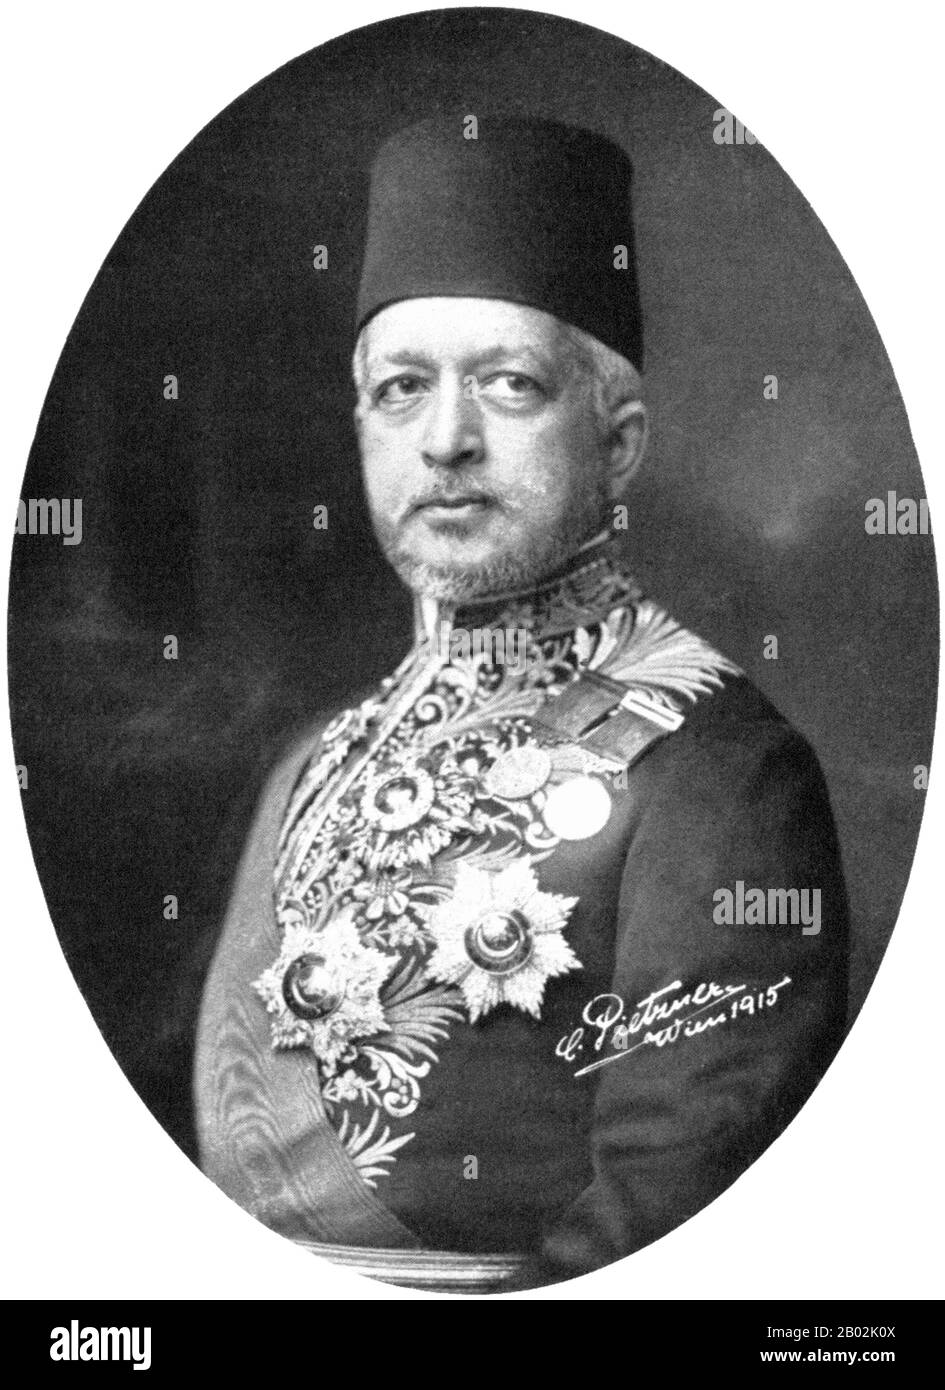 Said Halim Pasha (Ottoman Turkish: سعيد حليم پاشا ; Albanian: Said Halimi; 18 January 1865 – 5 December 1921) was a statesman who served as the Grand Vizier of the Ottoman Empire from 1913 to 1917. Born in Cairo, Egypt, he was the grandson of Muhammad Ali of Egypt, often considered the founder of modern Egypt.  He was one of the signatories to the Ottoman–German Alliance. Yet, he resigned after the incident of the pursuit of the battlecruiser SMS Goeben and the light cruiser SMS Breslau (a naval action in the Mediterranean Sea at the outbreak of the First World War), an event which served to c Stock Photo